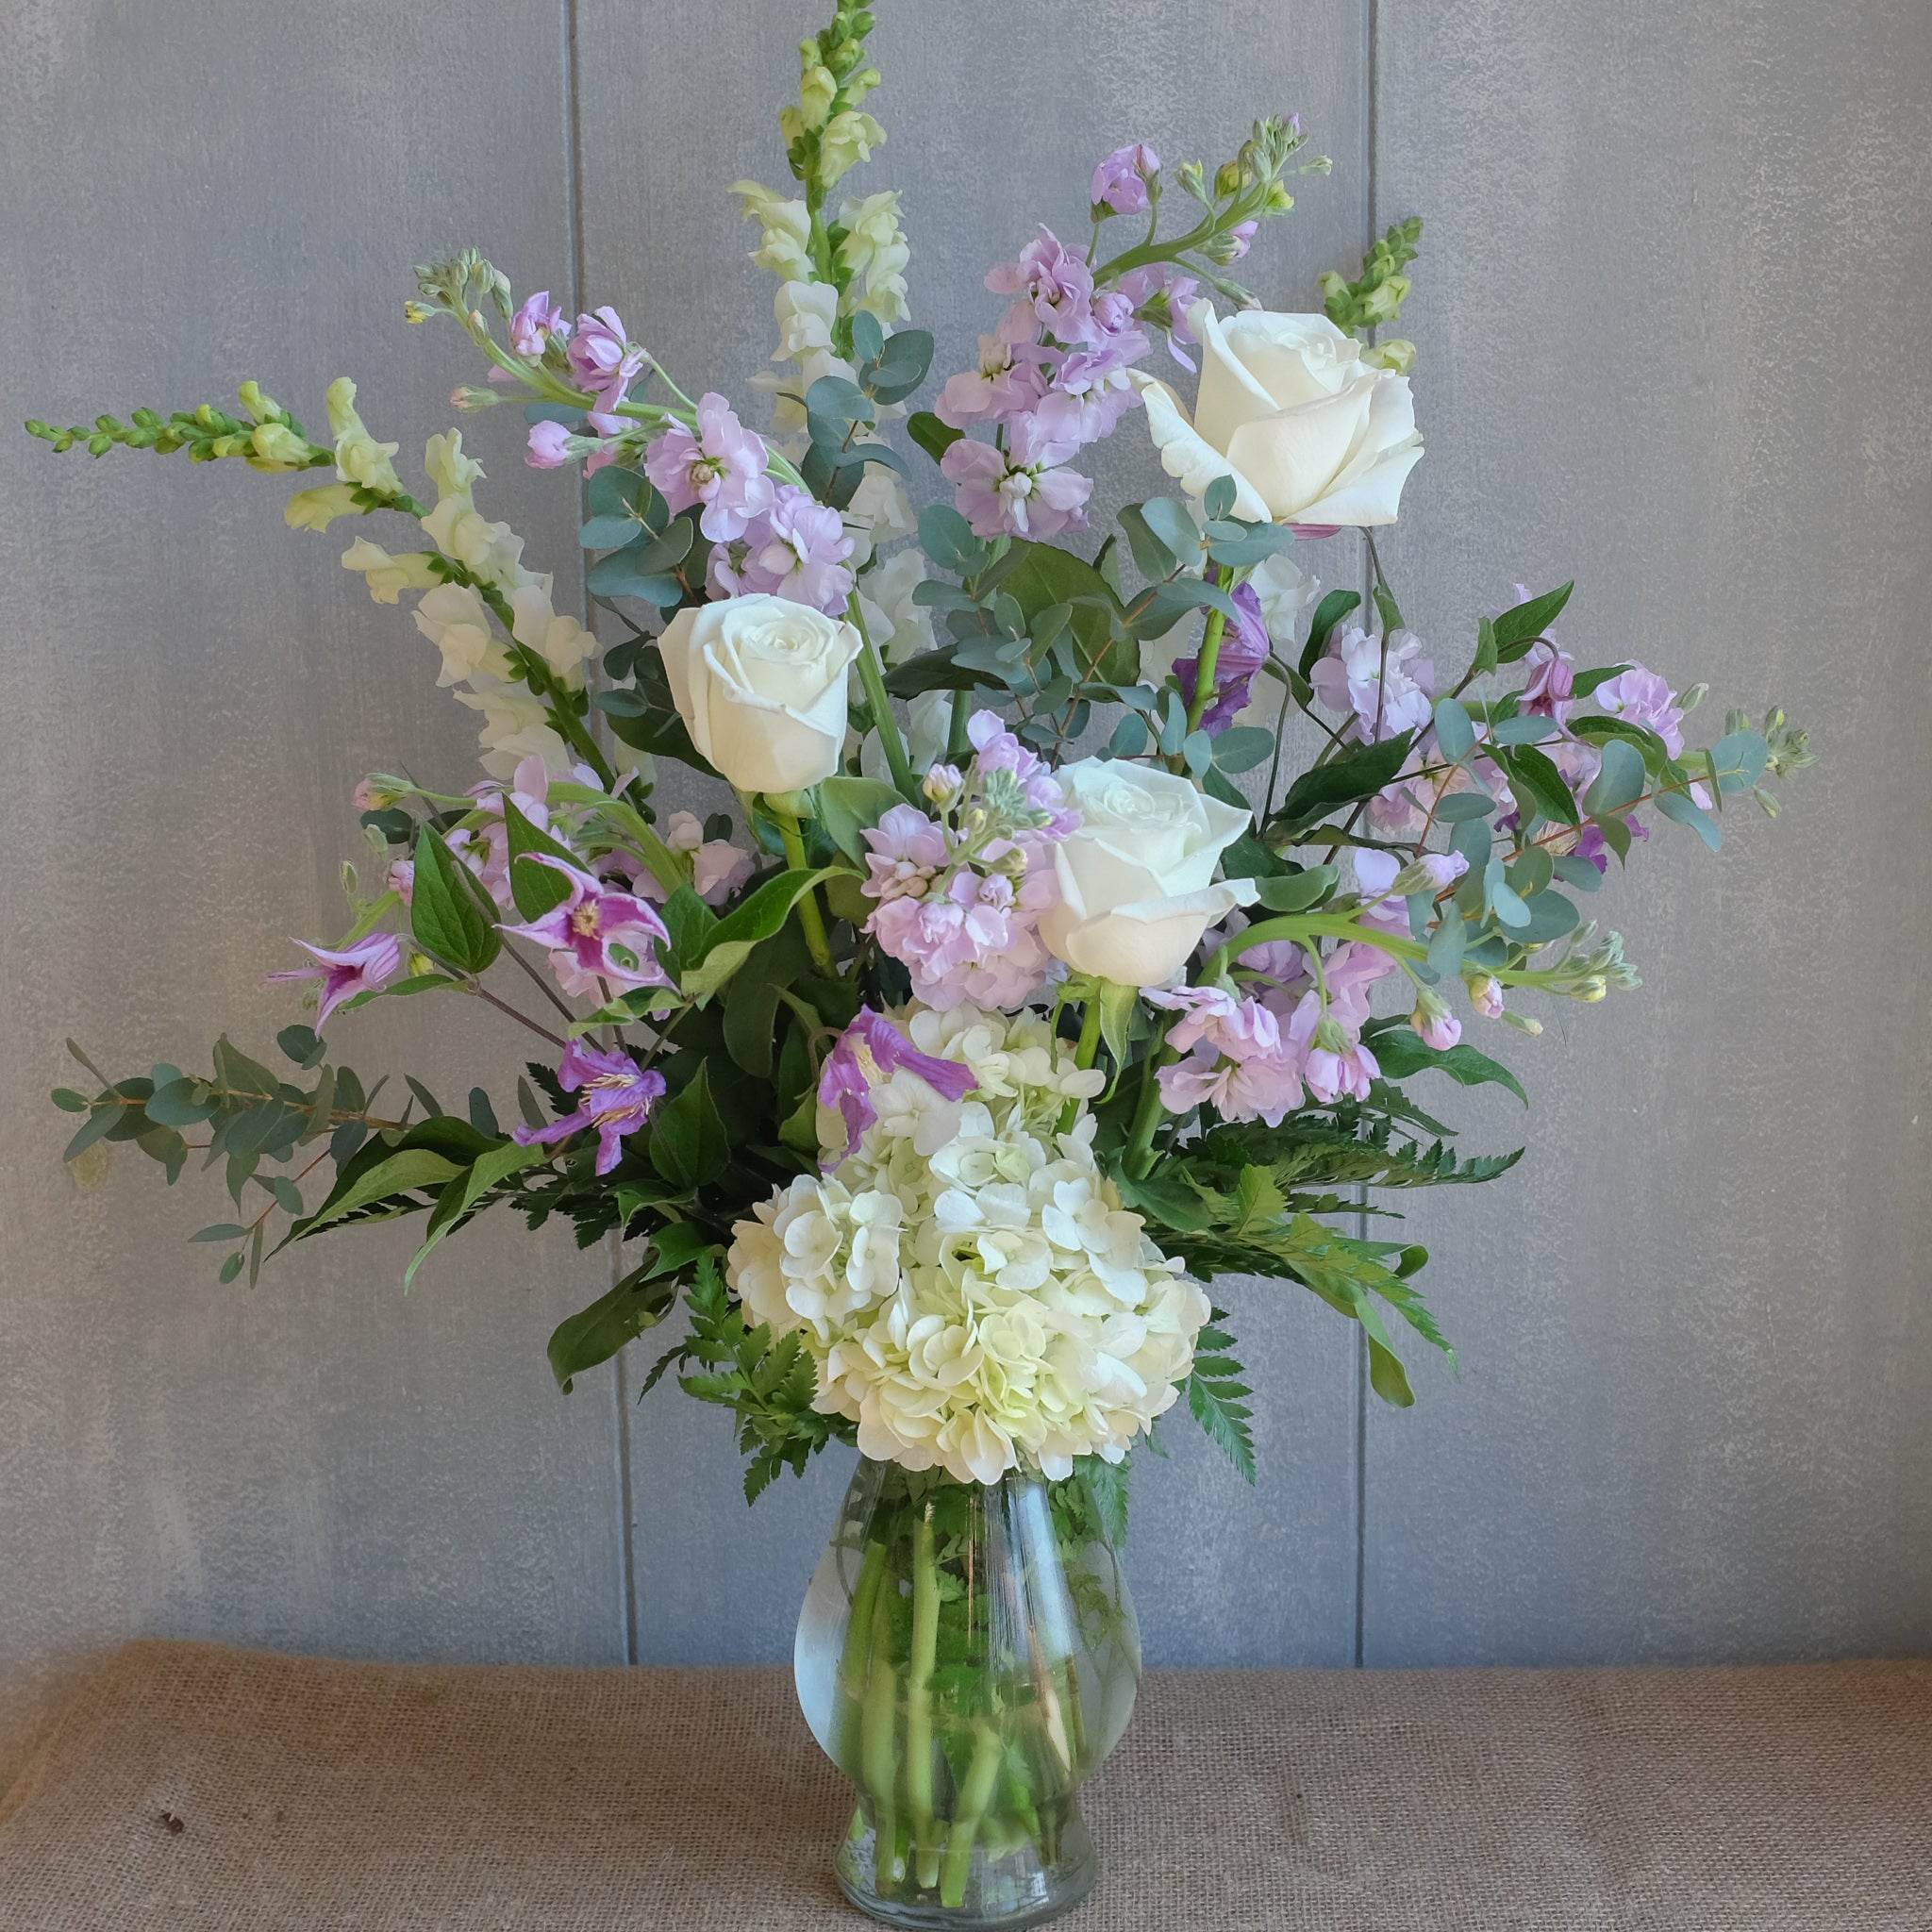 Lavender and white flower bouquet by Michler Florist.